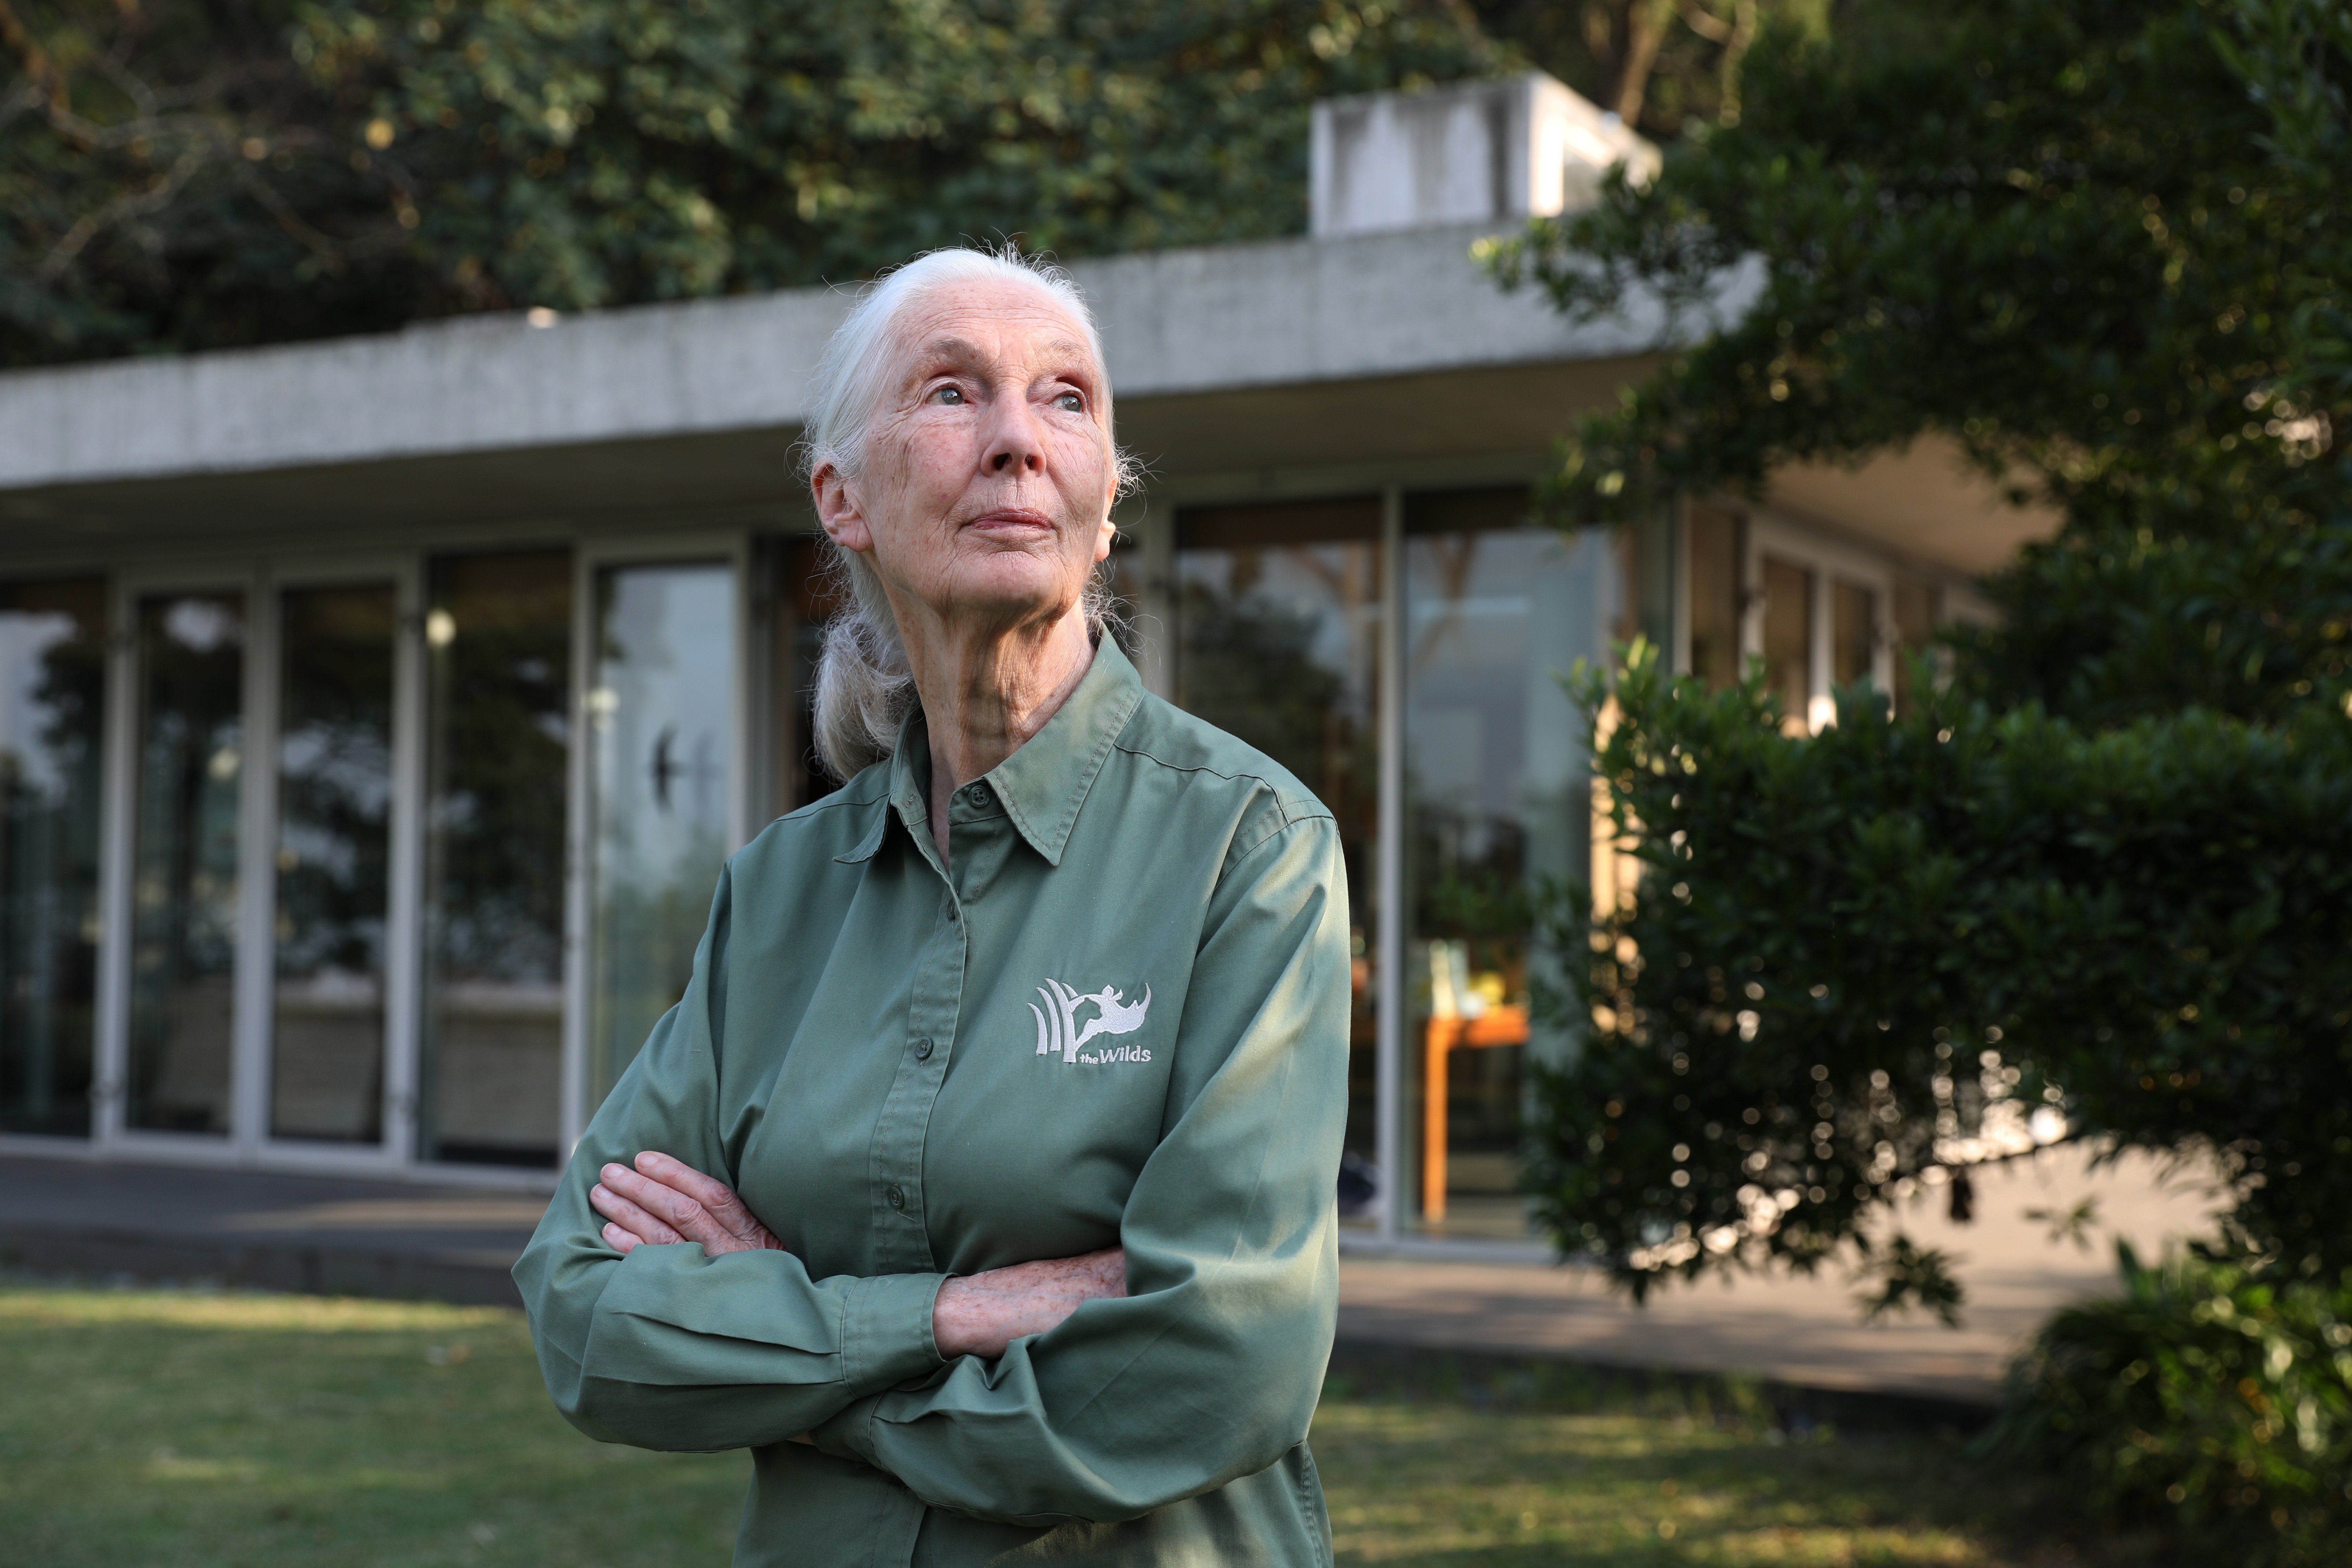 Dr Jane Goodall, 84, renowned British primatologist and founder of the Jane Goodall Institute, at Kadoorie Farm and Botanic Garden in Tai Po. Photo: Nora Tam